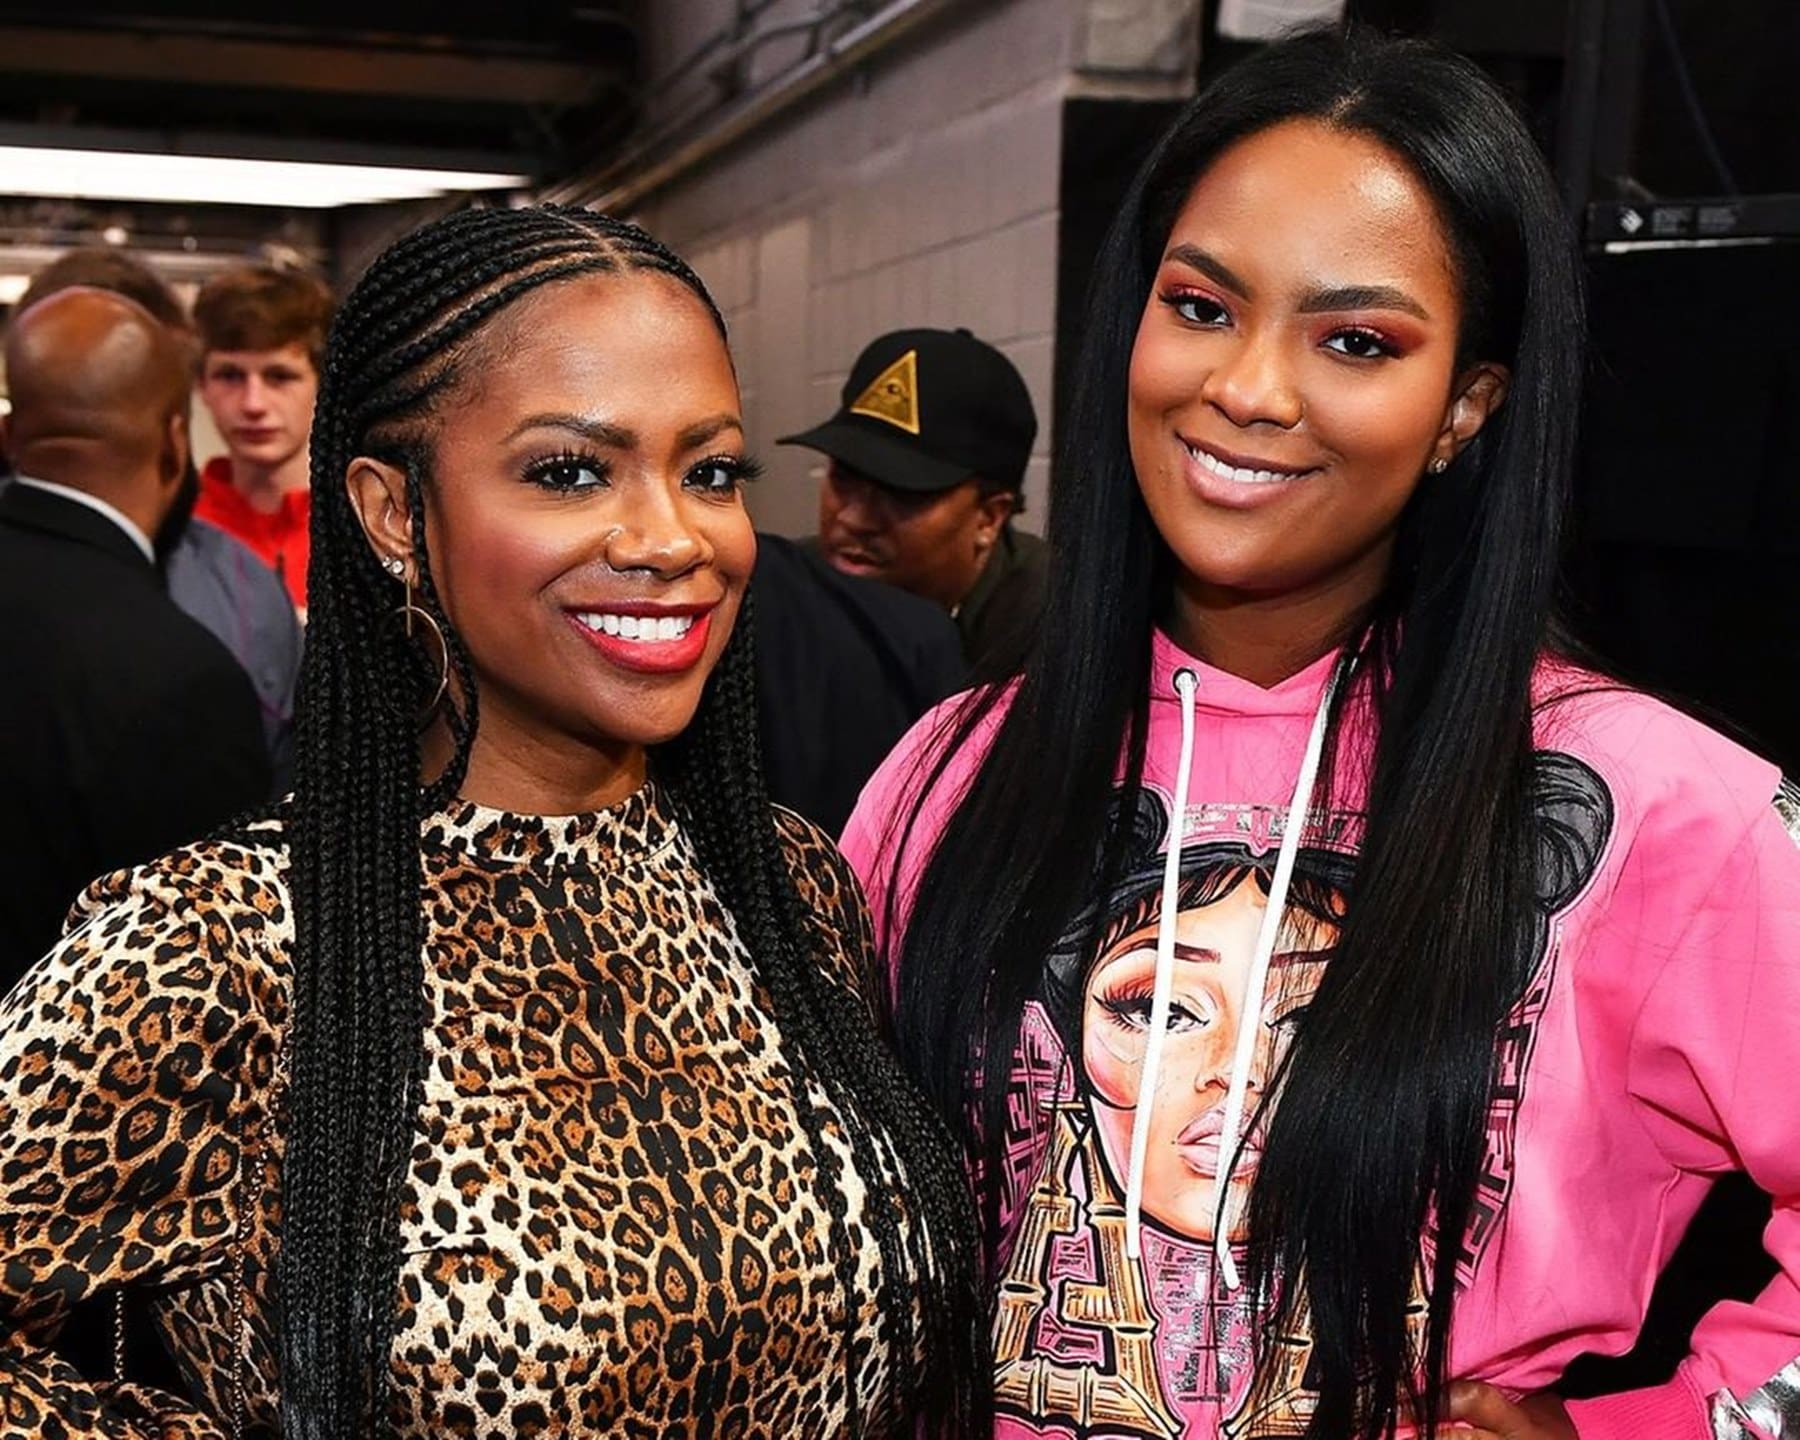 Kandi Burruss Received 45.5M Likes In 2019 - Check Out Her Post